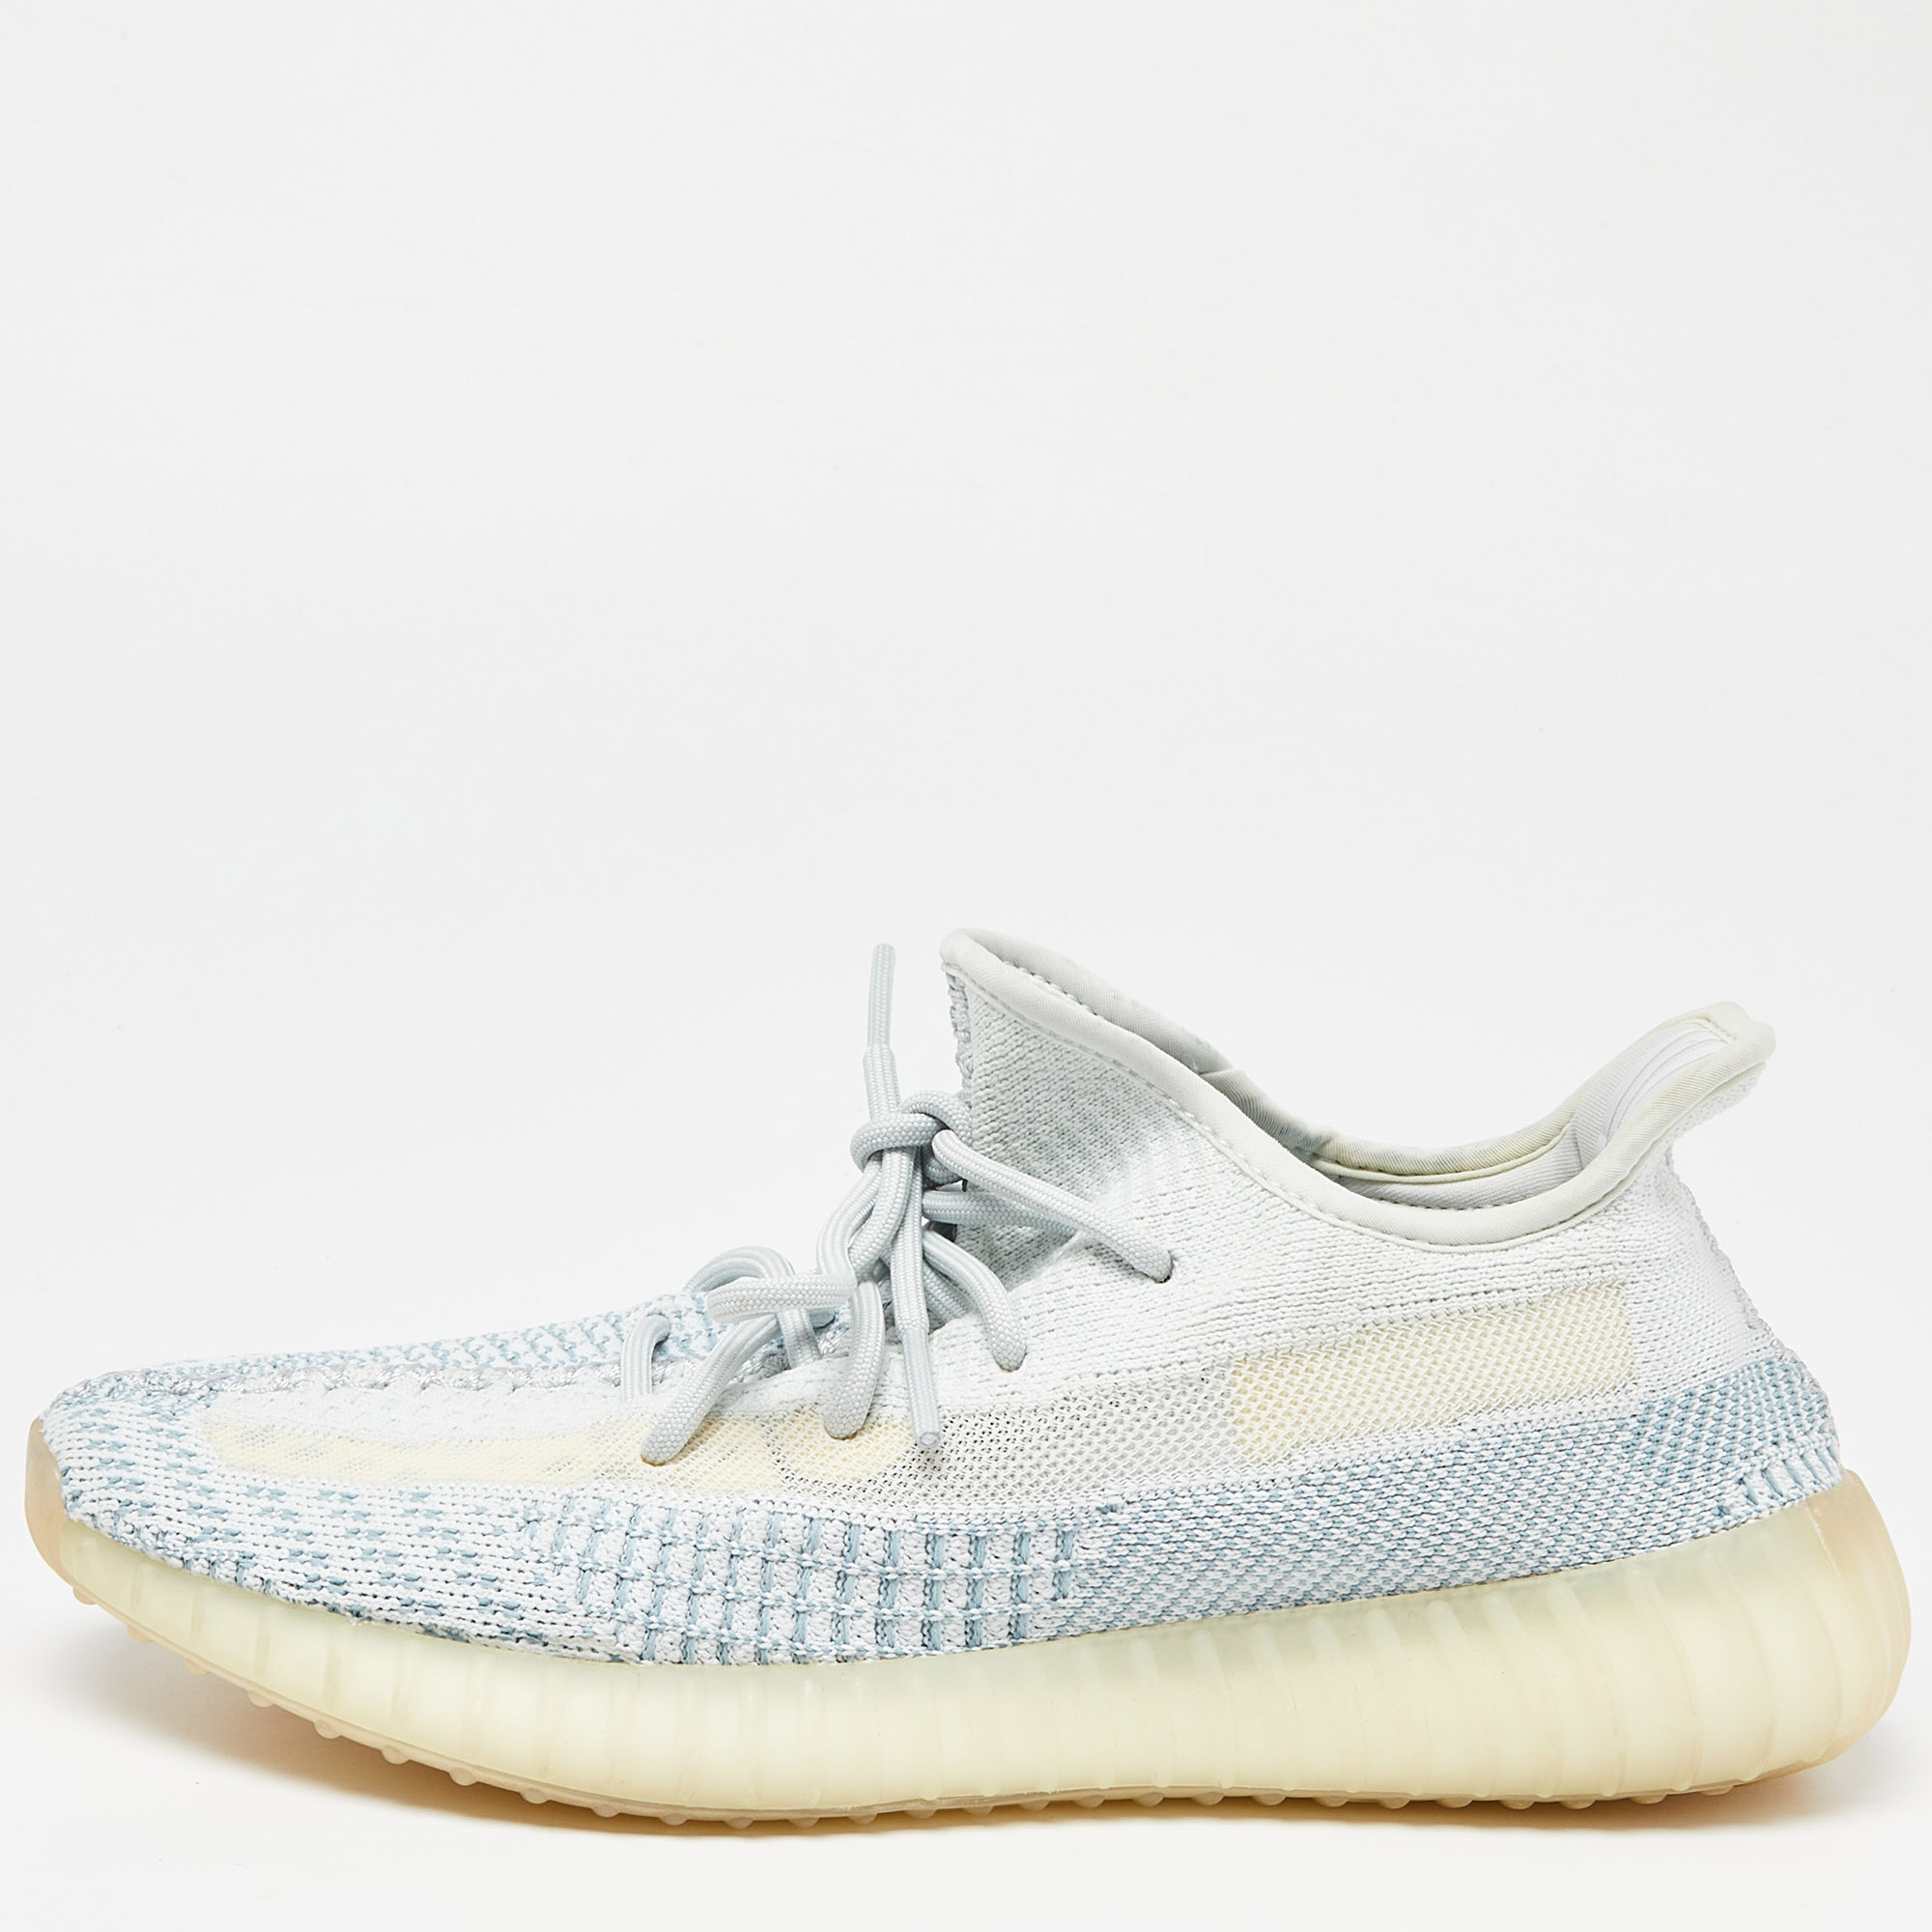 Pre-owned Yeezy X Adidas Pale Green Knit Fabric Boost 350 V2 Cloud White Non Reflective Sneakers Size 42 2/3